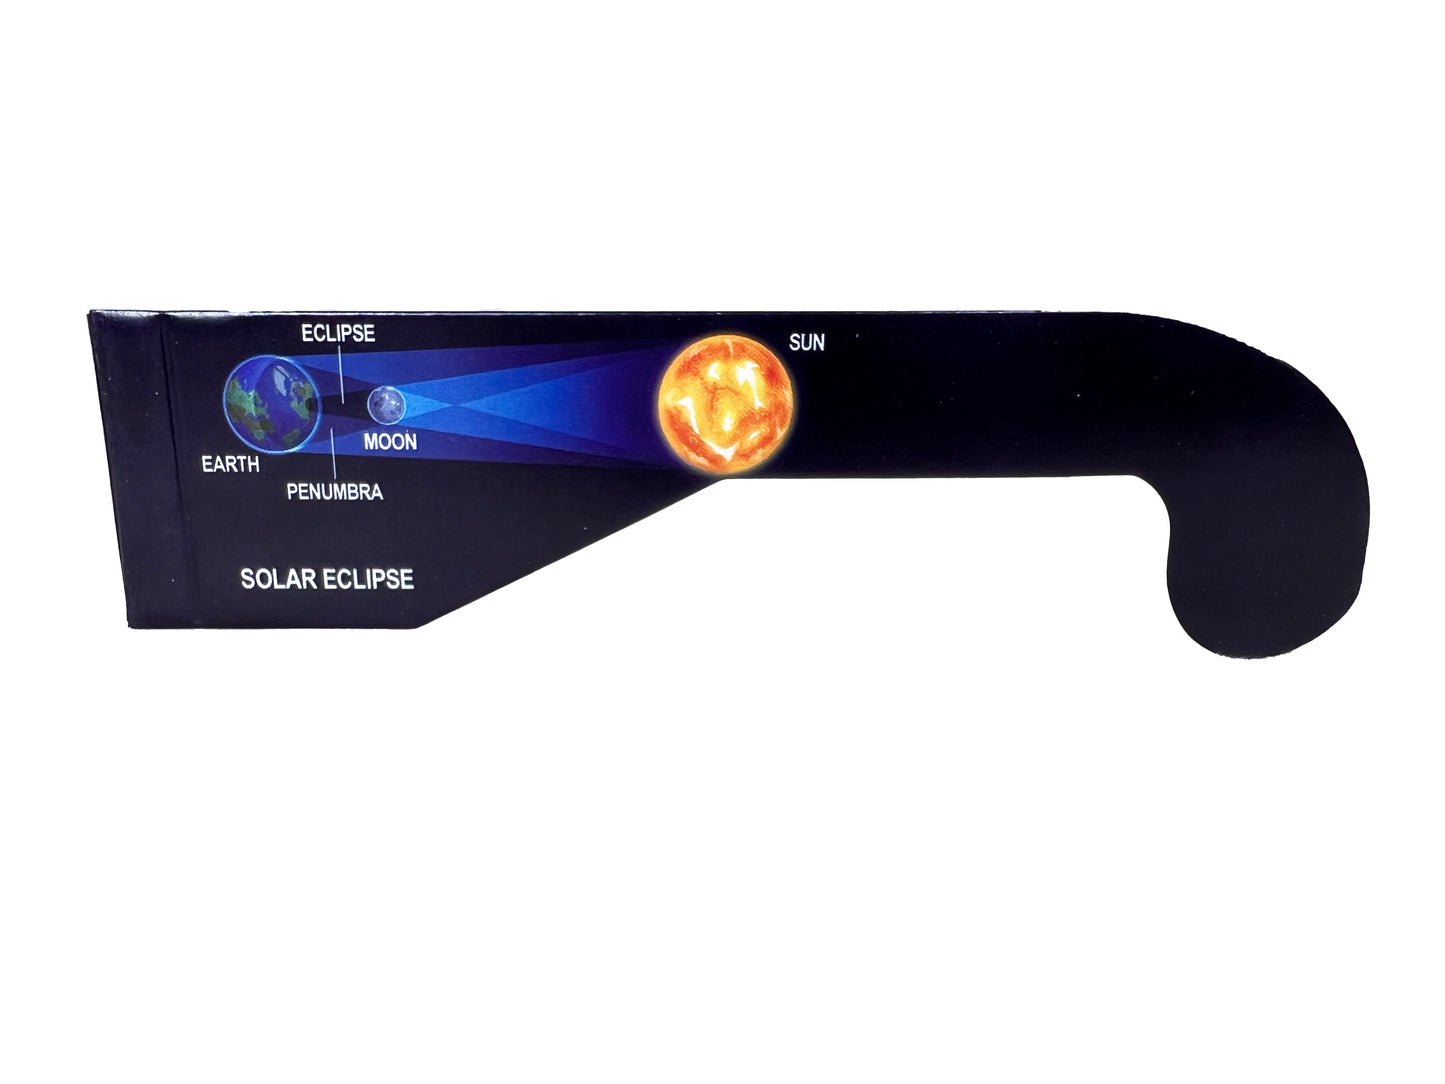 Solar Eclipse Paper Glasses - 6 Pack - Safe Glasses for Direct Sun Viewing, Meets Requirements of ISO 12312-2